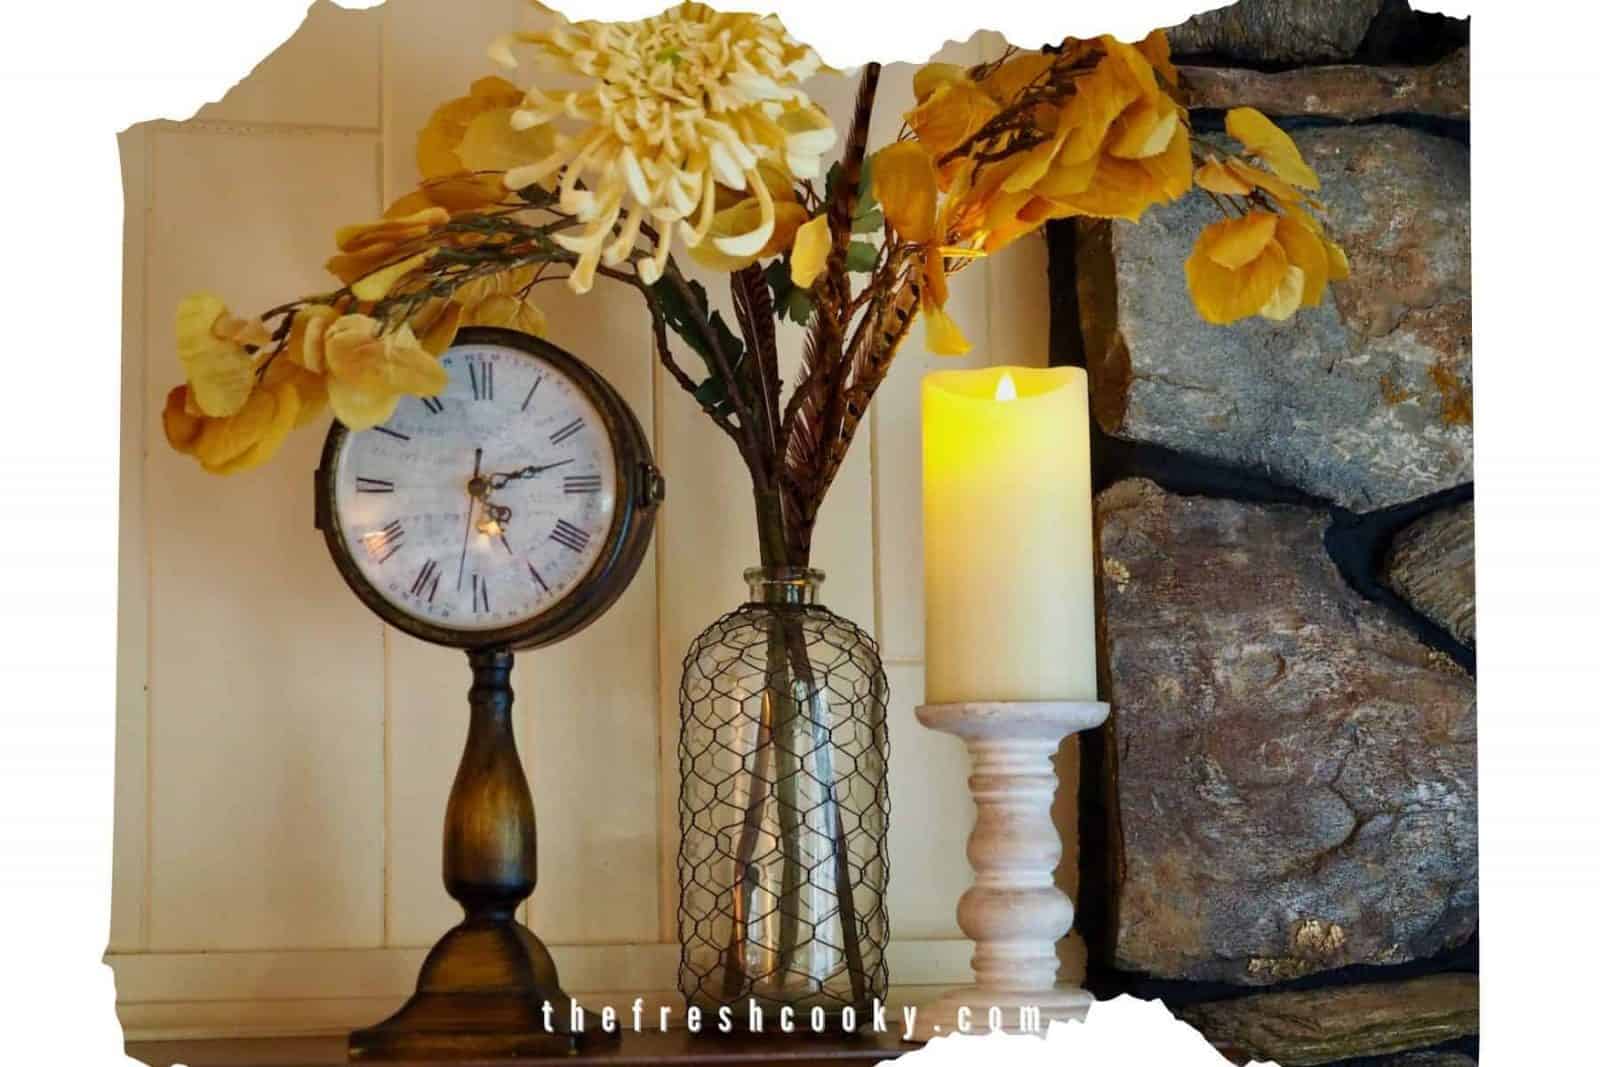 Fall-mantle with old time clock, glas vase witth aspen leaves, giantt mum and rustic candlestick with pillar candle